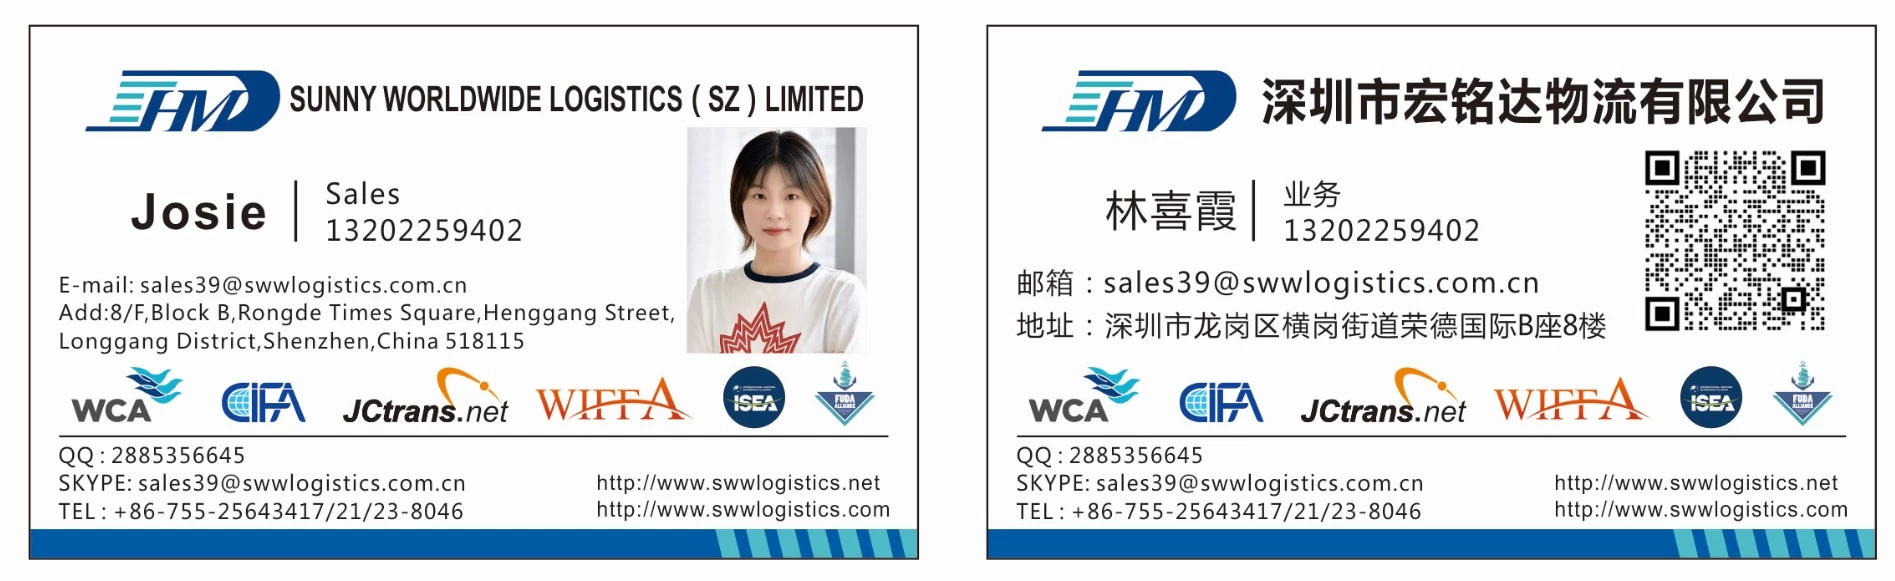 Air freight forwarder from China to Philippines international shipping rates, Sunny Worldwide Logistics